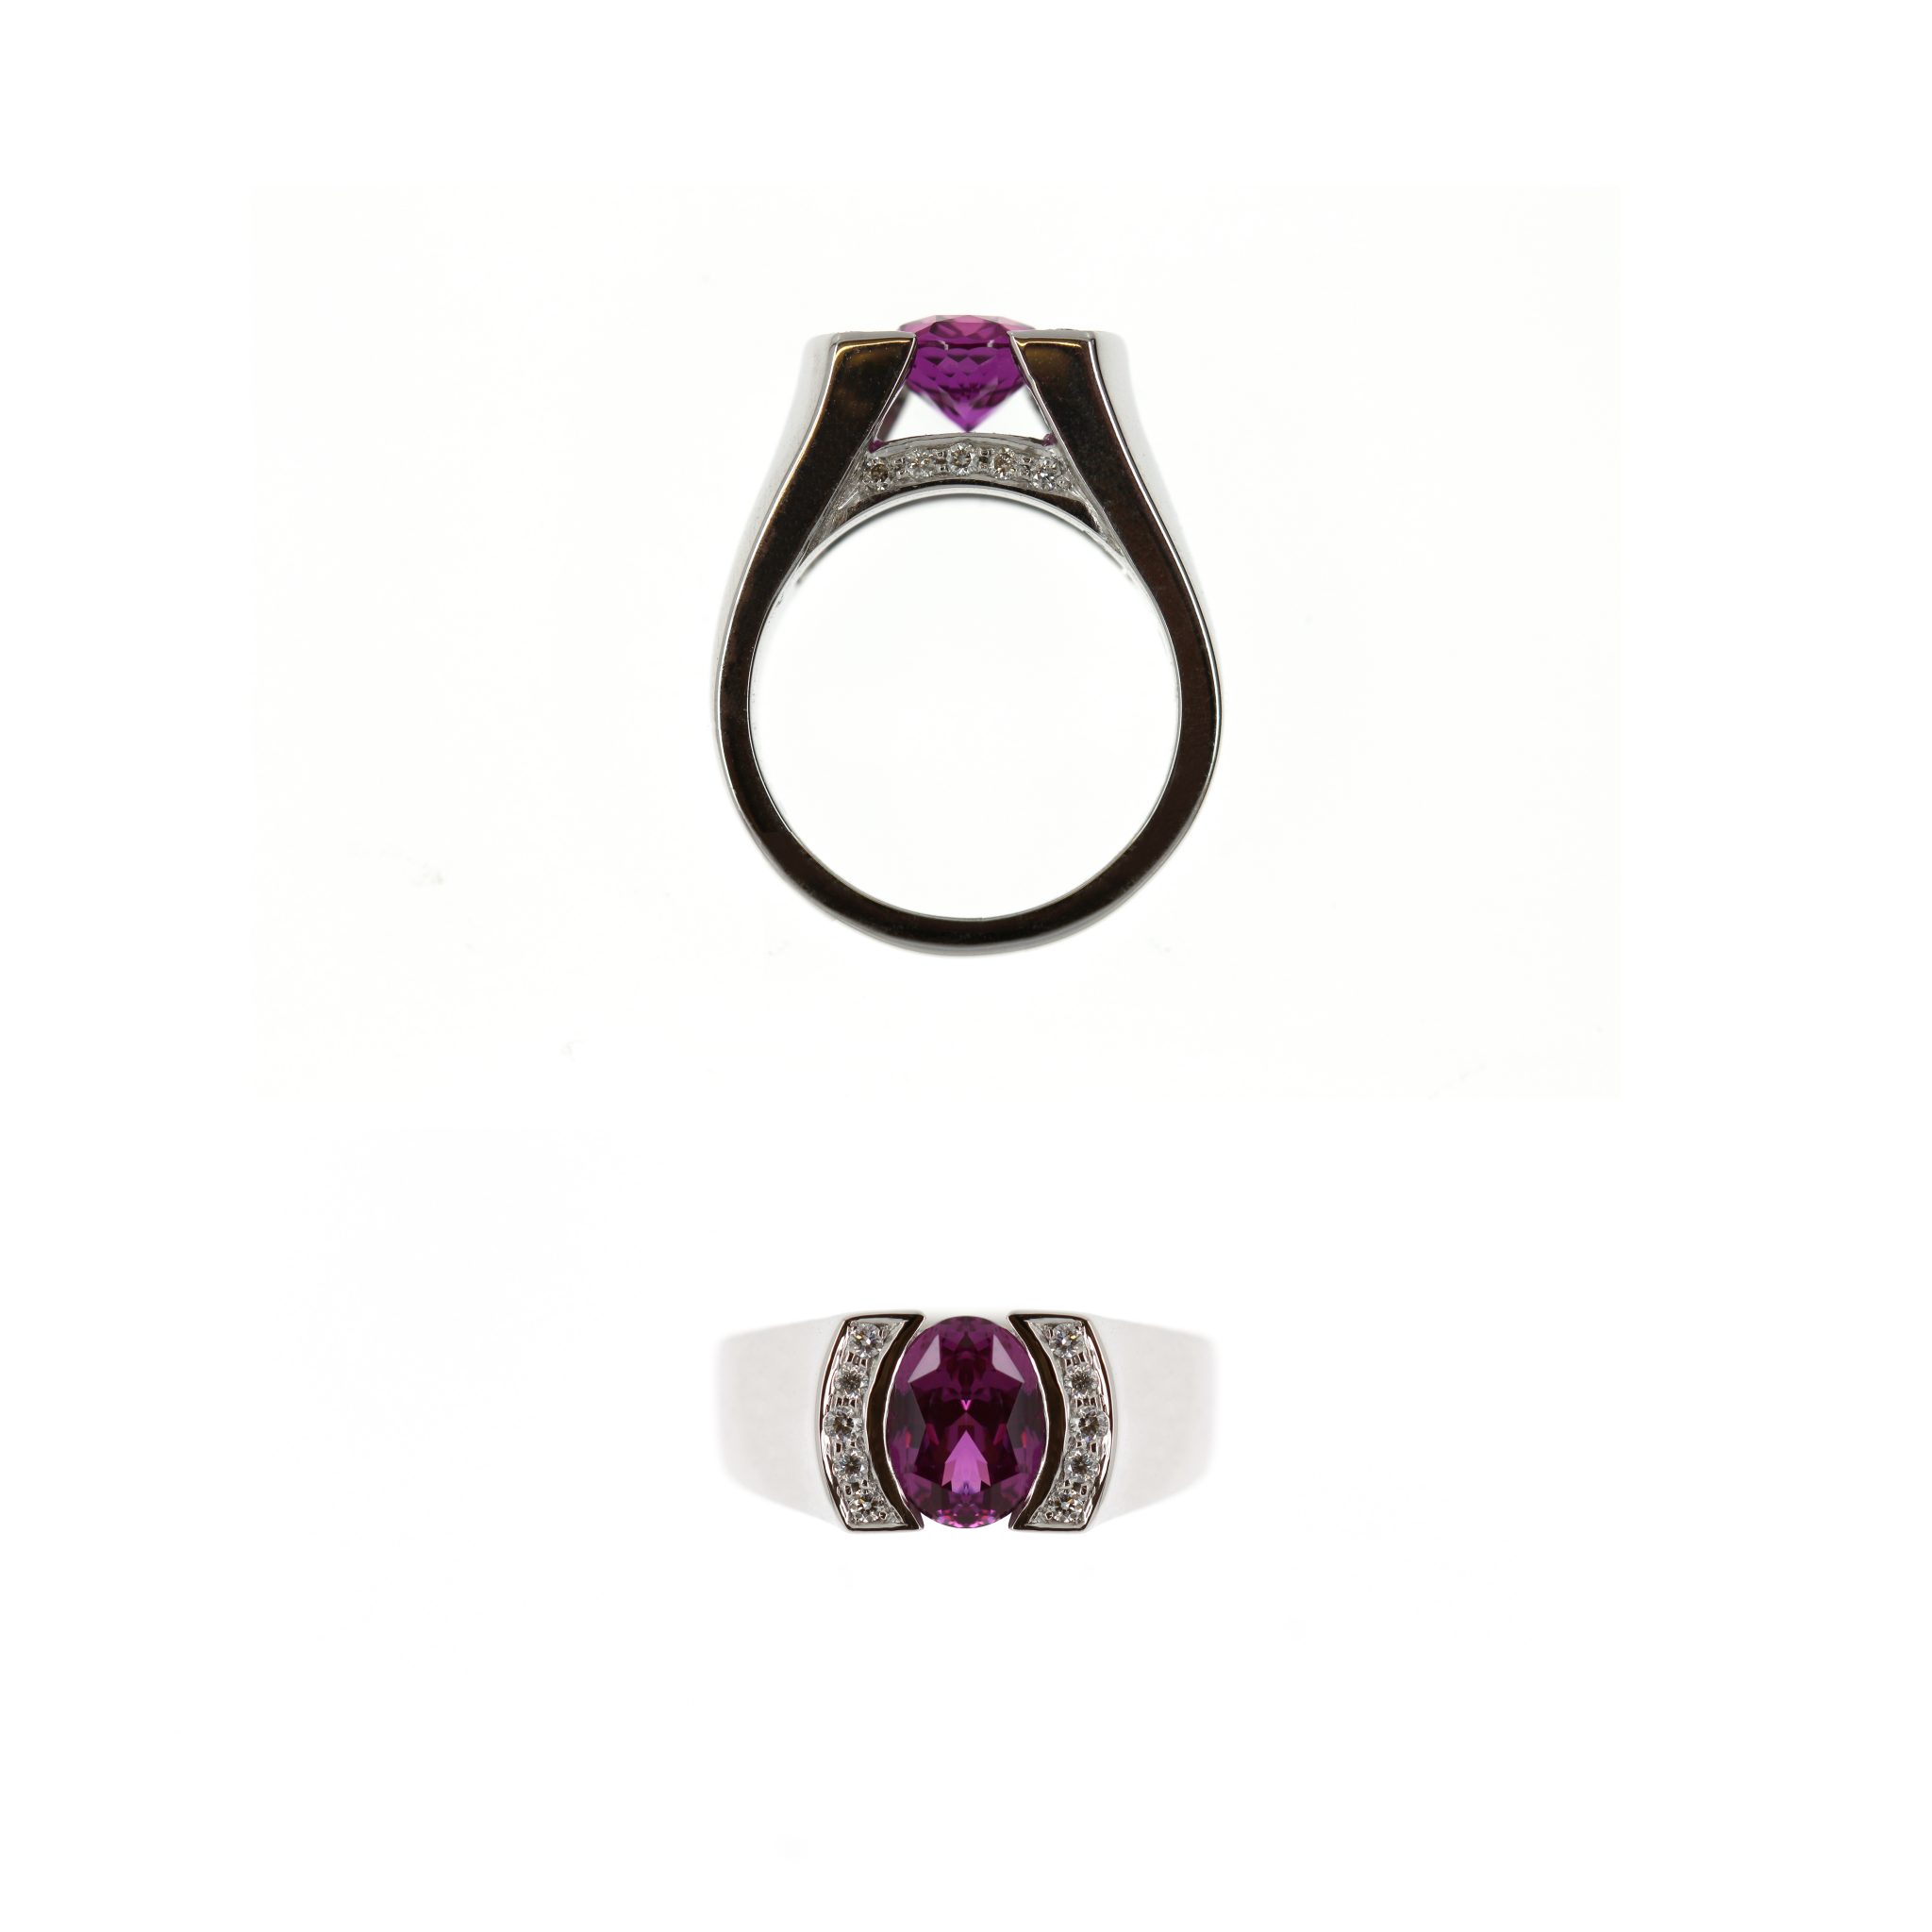 Oval rhodolite and diamond ring